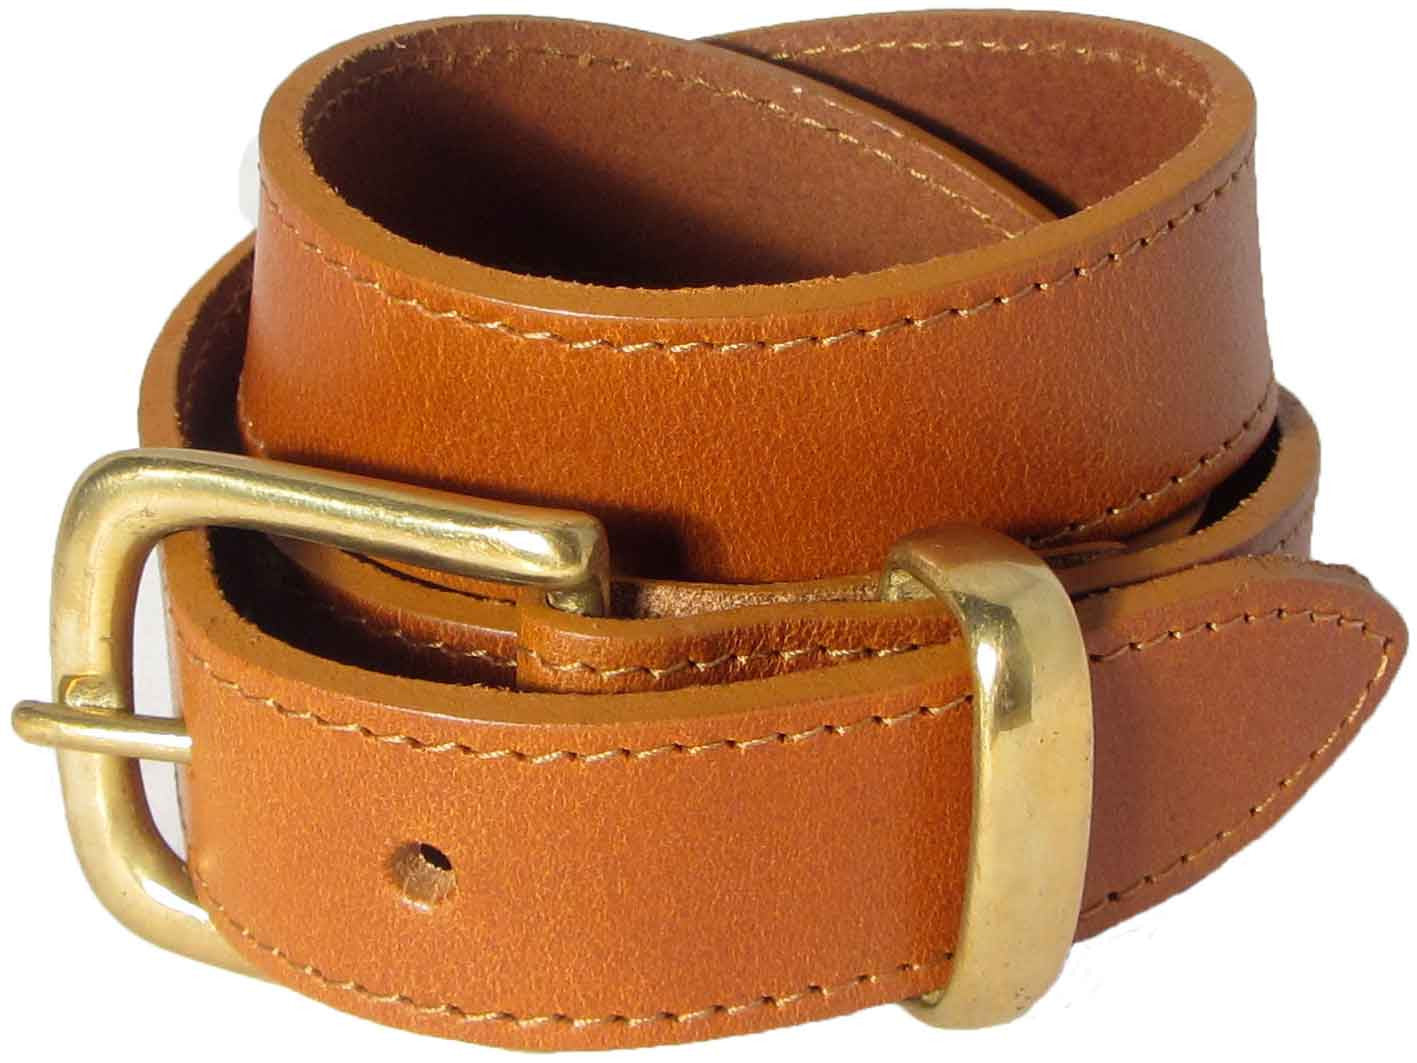 Lady Orion Tan Brown Belt with Gold Buckle luxury leather